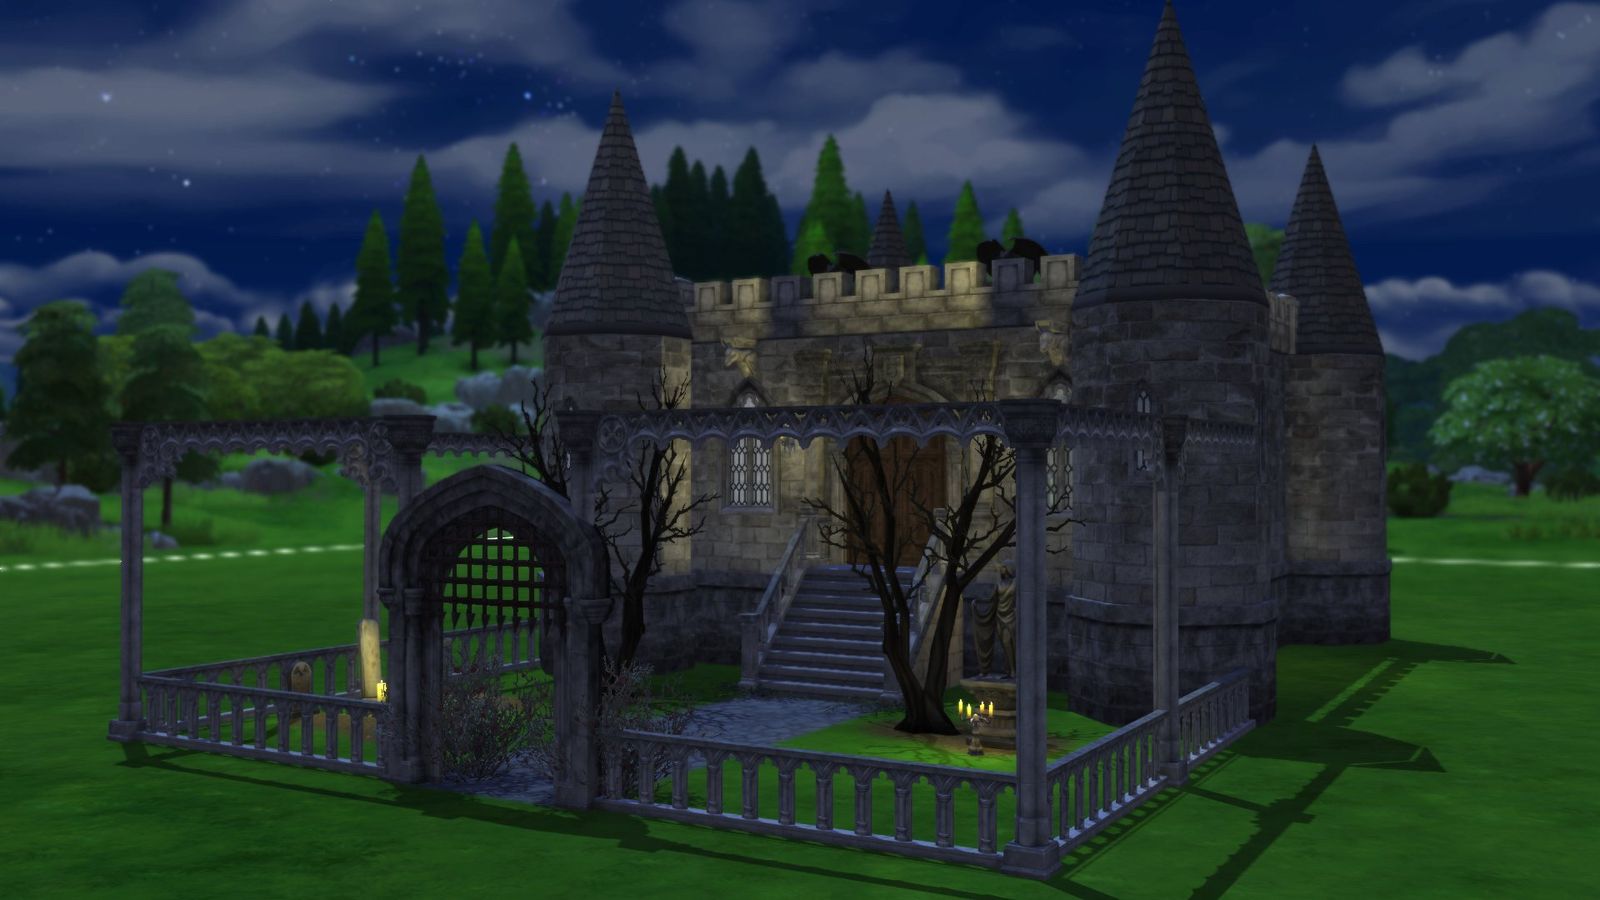 A gothic themed castle in The Sims 4 Castle Estate kit